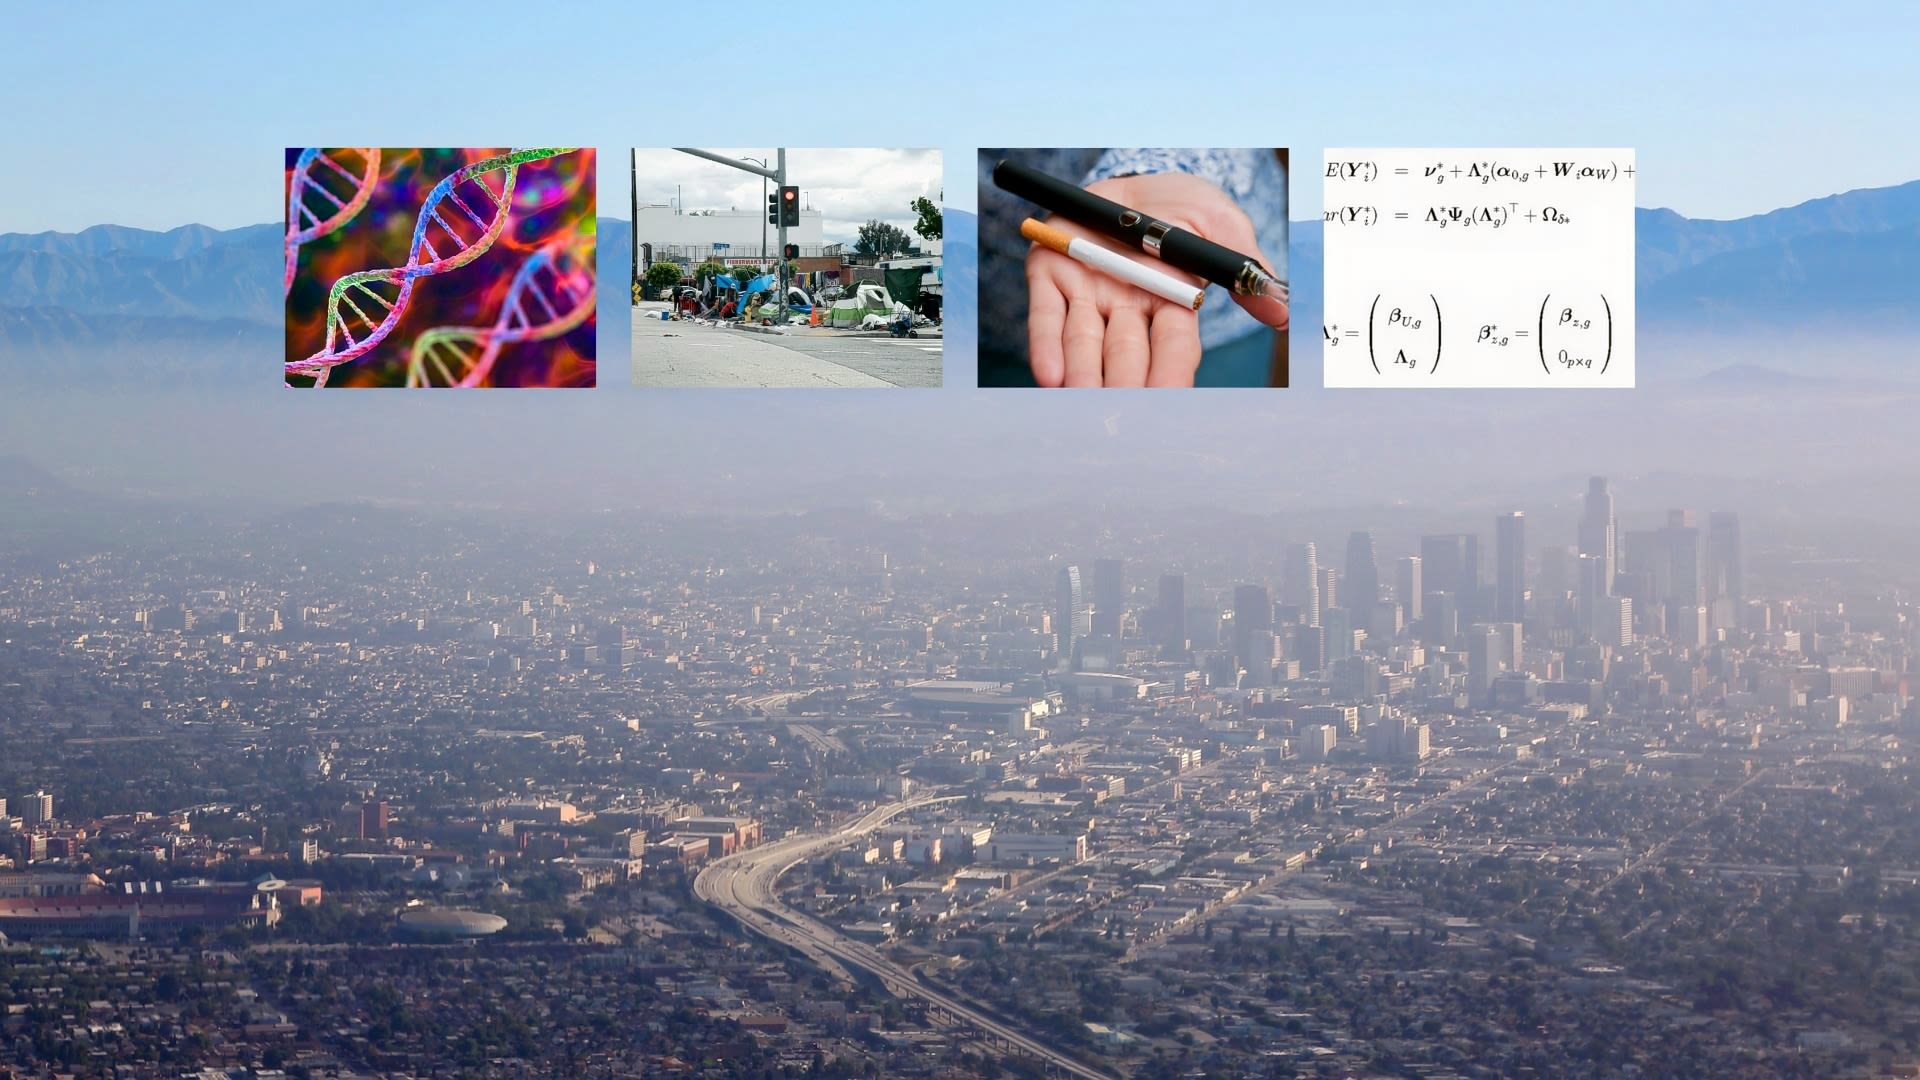 Los Angeles skyline with overlaid images of DNA strands, tents on the street, hand holding a cigarette and vape device, and mathematics